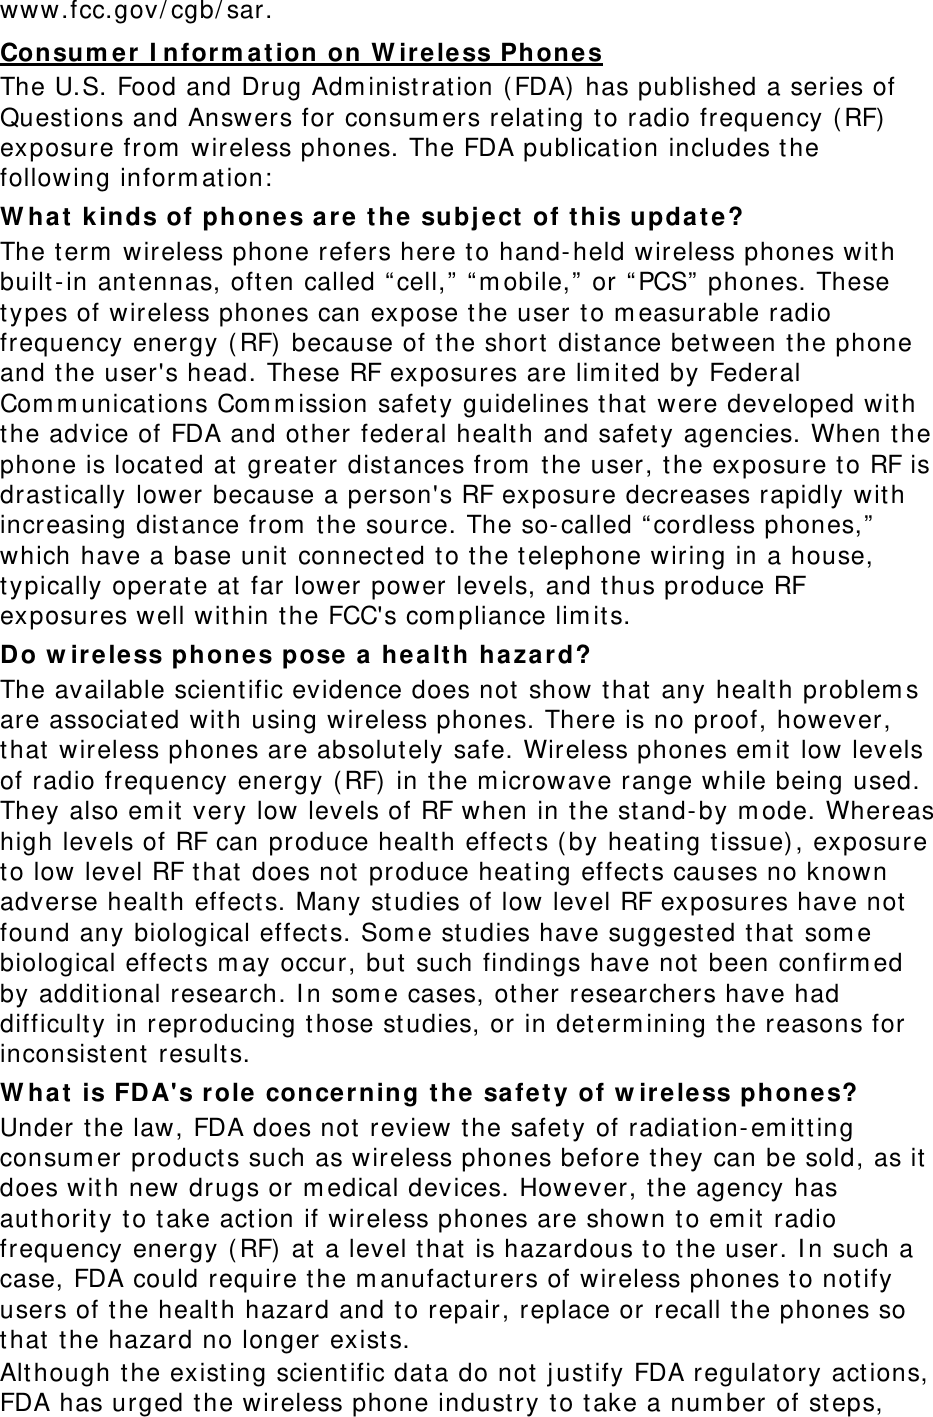 www.fcc.gov/ cgb/ sar. Consum e r  I nform a t ion on W ir e less Phones The U.S. Food and Drug Adm inist ration ( FDA) has published a series of Quest ions and Answers for consum ers relat ing t o radio frequency ( RF) exposure from  wireless phones. The FDA publicat ion includes t he following inform at ion:  W ha t  k in ds of ph one s are t he  subj ect  of t his upda t e? The term  wireless phone refers here t o hand- held wireless phones wit h built -in ant ennas, oft en called “ cell,”  “ m obile,”  or “ PCS”  phones. These types of wireless phones can expose t he user t o m easurable radio frequency energy ( RF)  because of the short  distance bet ween t he phone and the user&apos;s head. These RF exposures are lim ited by Federal Com m unicat ions Com m ission safet y guidelines that  were developed wit h the advice of FDA and other federal healt h and safet y agencies. When t he phone is located at greater distances from  the user, t he exposure t o RF is drast ically lower because a person&apos;s RF exposure decreases rapidly with increasing distance from  t he source. The so- called “ cordless phones,”  which have a base unit  connected t o t he telephone wiring in a house, typically operat e at far lower power levels, and thus produce RF exposures well within t he FCC&apos;s com pliance lim it s. Do w ir e le ss phones pose a  he a lt h haza rd? The available scient ific evidence does not show t hat any health problem s are associated with using wireless phones. There is no proof, however, that  wireless phones are absolut ely safe. Wireless phones em it  low levels of radio frequency energy ( RF)  in t he m icrowave range while being used. They also em it  very low levels of RF when in t he stand- by m ode. Whereas high levels of RF can produce health effect s ( by heat ing t issue) , exposure to low level RF t hat does not  produce heat ing effect s causes no known adverse healt h effect s. Many studies of low level RF exposures have not  found any biological effects. Som e studies have suggested t hat som e biological effect s m ay occur, but such findings have not  been confirm ed by additional research. I n som e cases, other researchers have had difficulty in reproducing t hose studies, or in det erm ining t he reasons for inconsist ent  results. W ha t  is FDA&apos;s r ole  conce r ning t he sa fet y of w ireless phones? Under t he law, FDA does not  review t he safet y of radiat ion- em itting consum er products such as wireless phones before they can be sold, as it does with new drugs or m edical devices. However, the agency has aut hority to t ake act ion if wireless phones are shown t o em it  radio frequency energy ( RF)  at a level that  is hazardous to t he user. I n such a case, FDA could require t he m anufacturers of wireless phones to notify users of t he healt h hazard and to repair, replace or recall t he phones so that  t he hazard no longer exist s. Alt hough the exist ing scient ific data do not j ust ify FDA regulatory actions, FDA has urged t he wireless phone industry t o t ake a num ber of steps, 